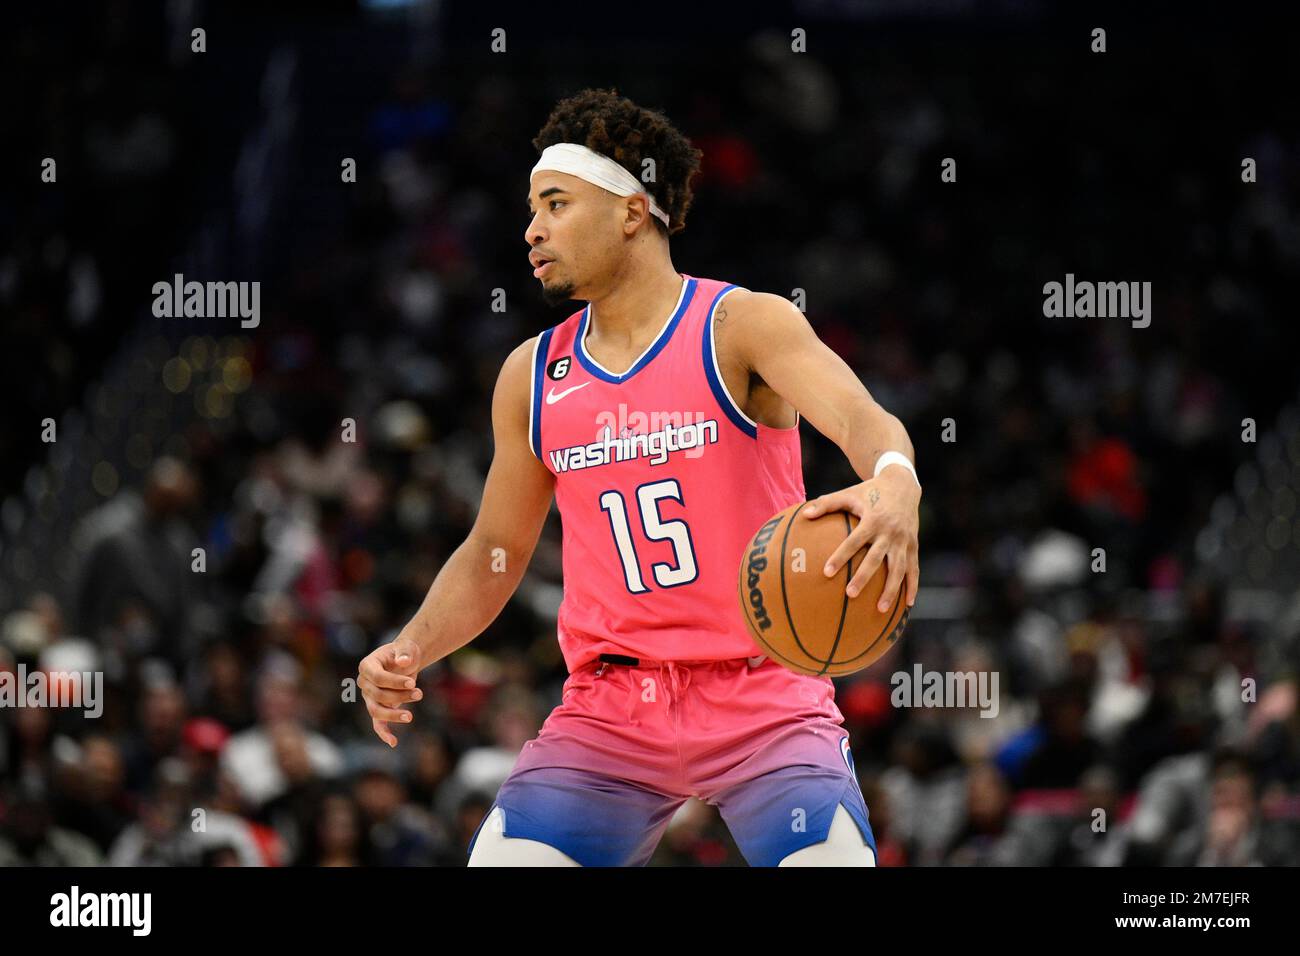 Washington Wizards guard Dotson in action during the first half of NBA basketball game against the Brooklyn Nets, Monday, Dec. 12, 2022, in Washington. (AP Photo/Nick Wass Photo - Alamy